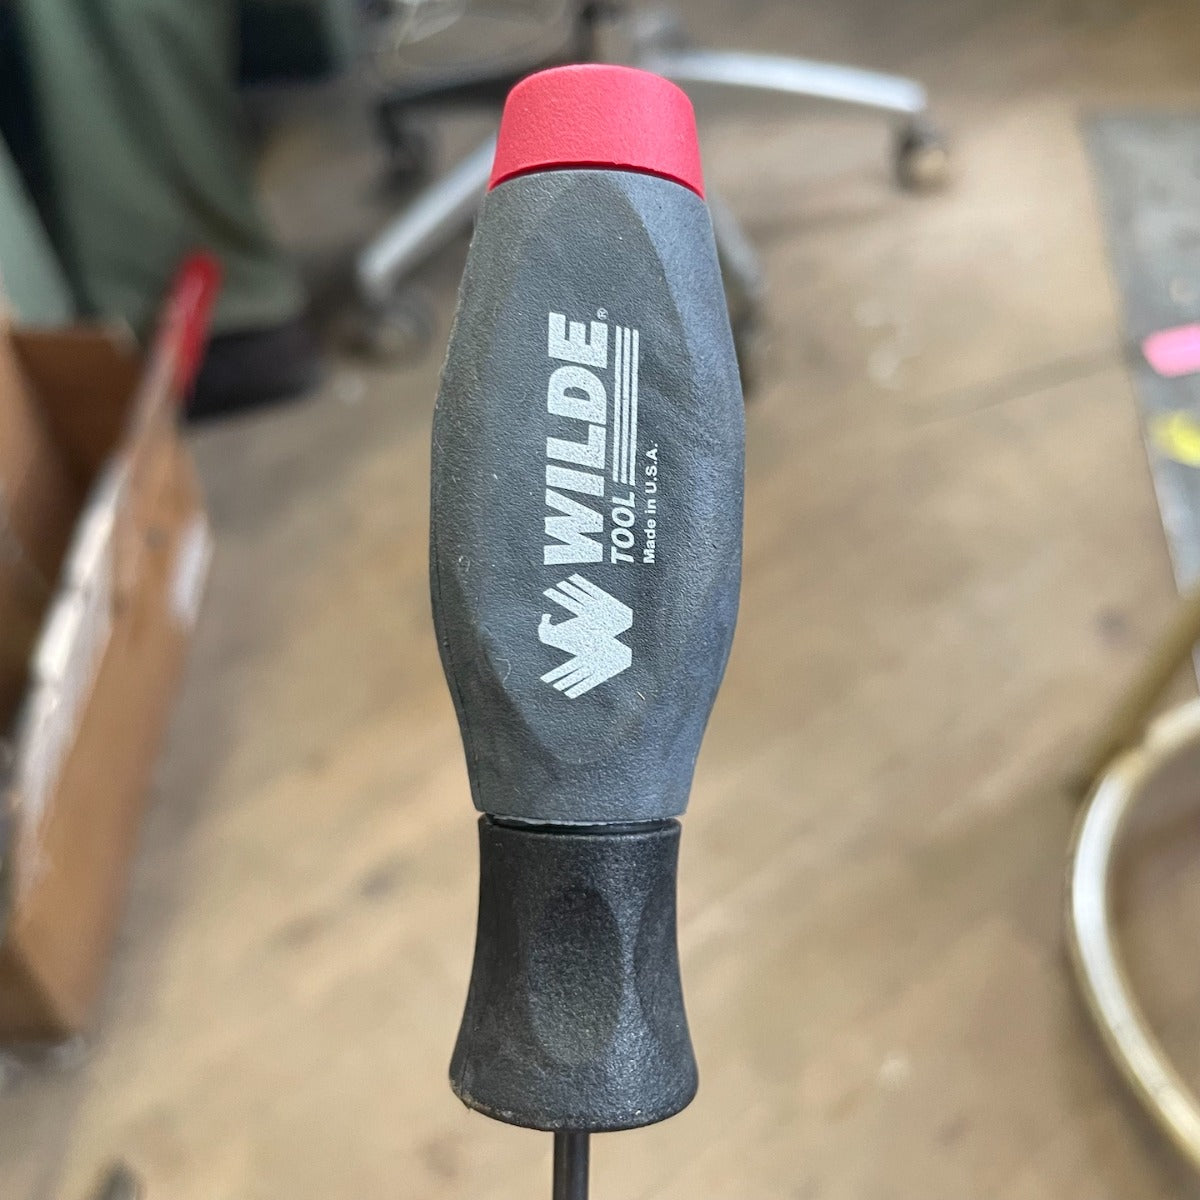 1/8" Wilde Slotted Screwdriver 3" Blade - 6 1/2" Overall